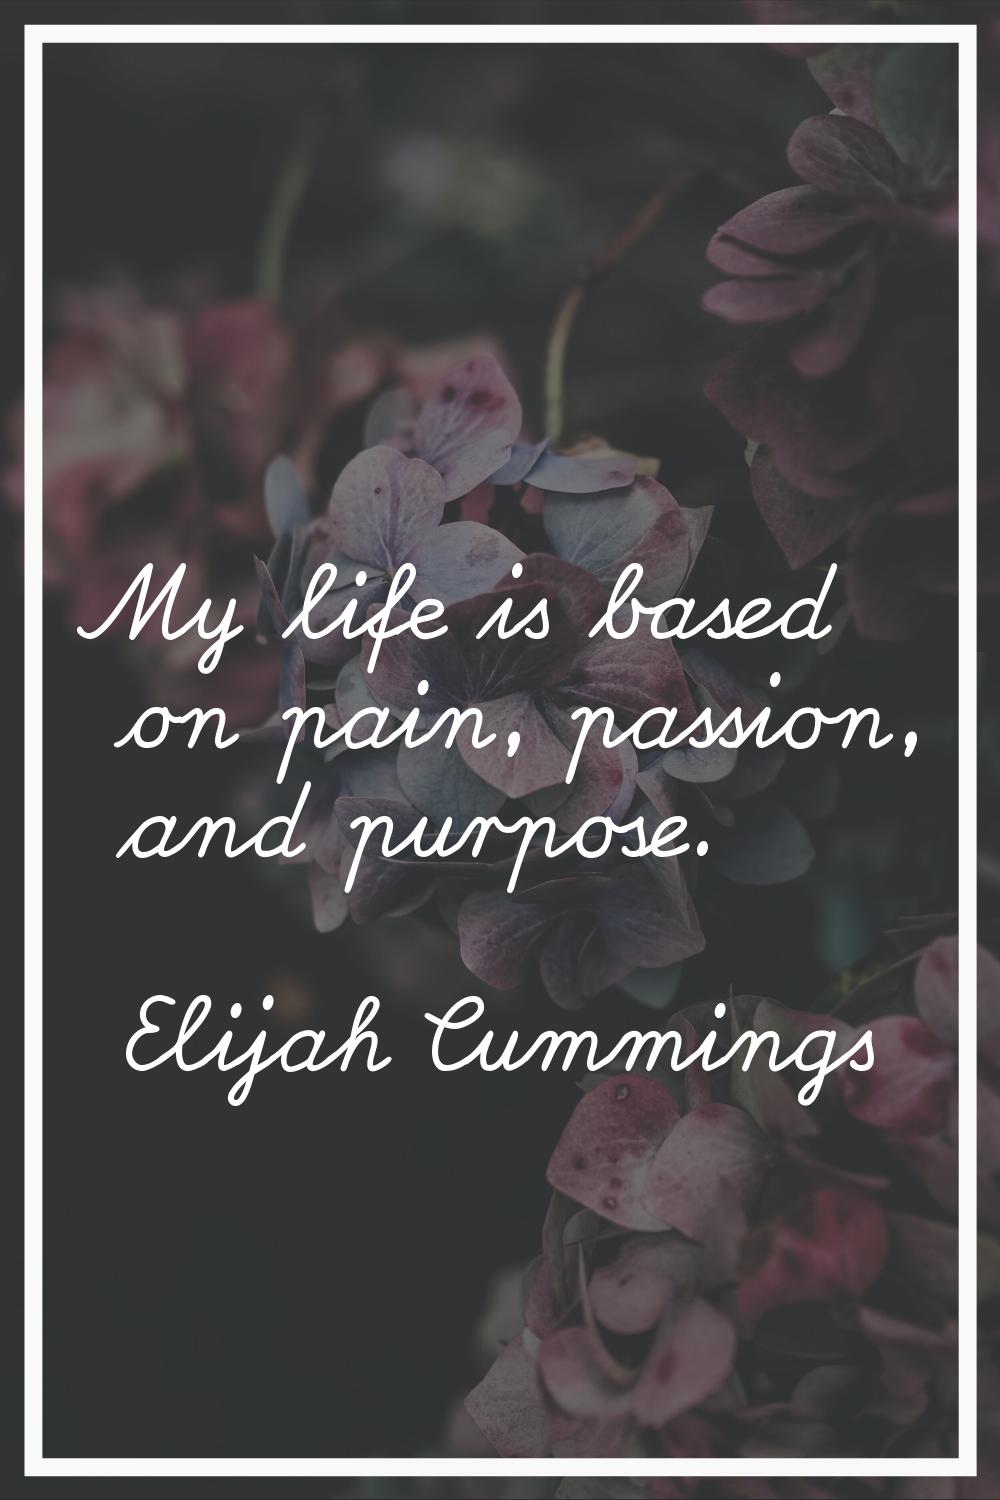 My life is based on pain, passion, and purpose.